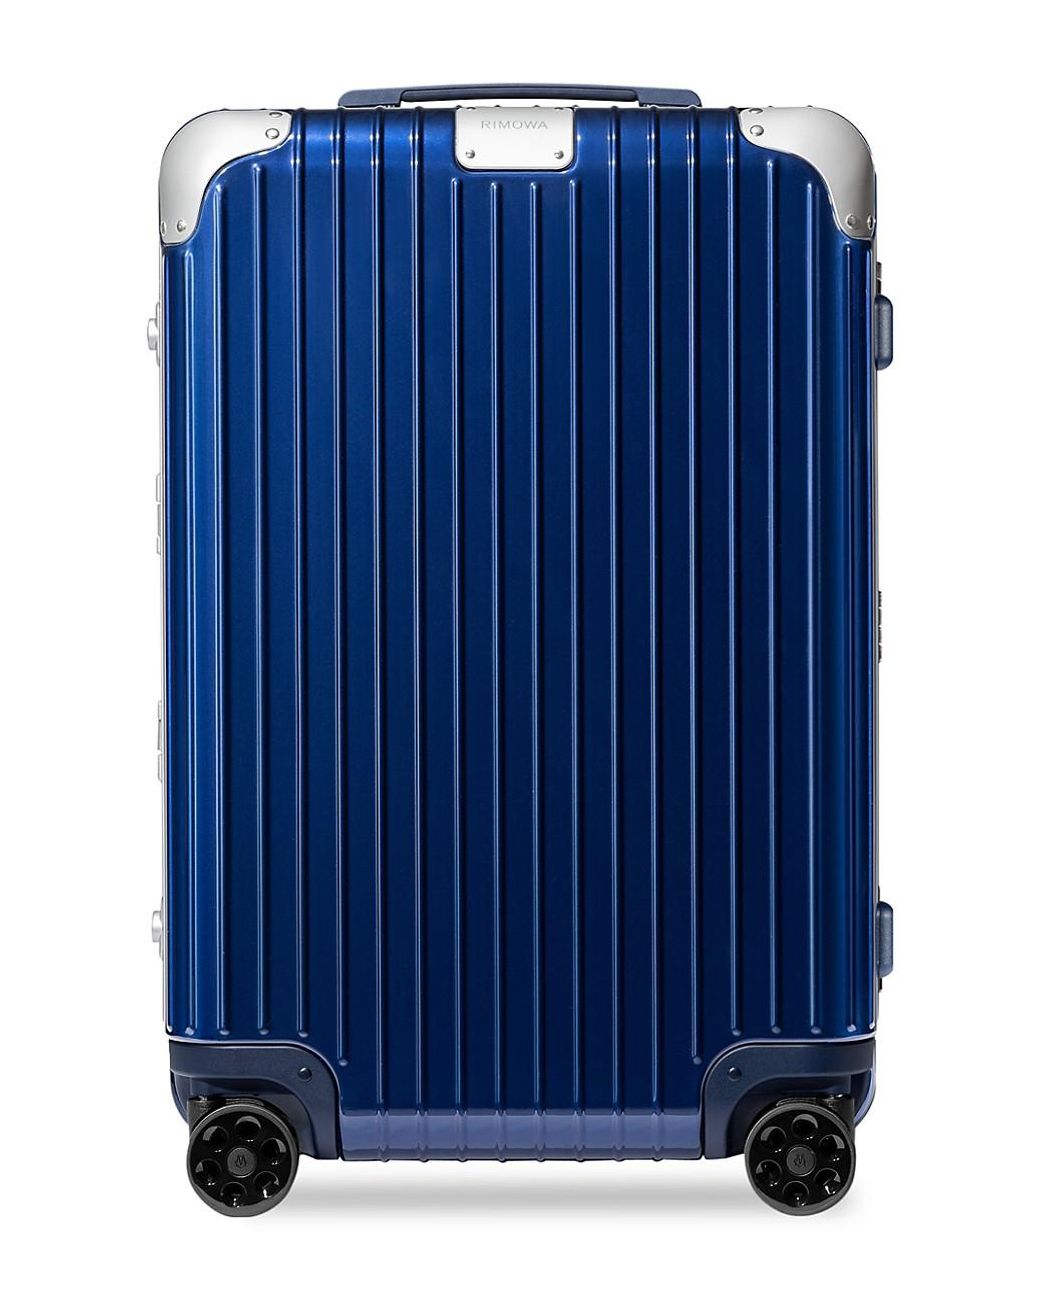 RIMOWA Hybrid Check-in L Suitcase in Blue_matte (Blue) for Men - Save 8